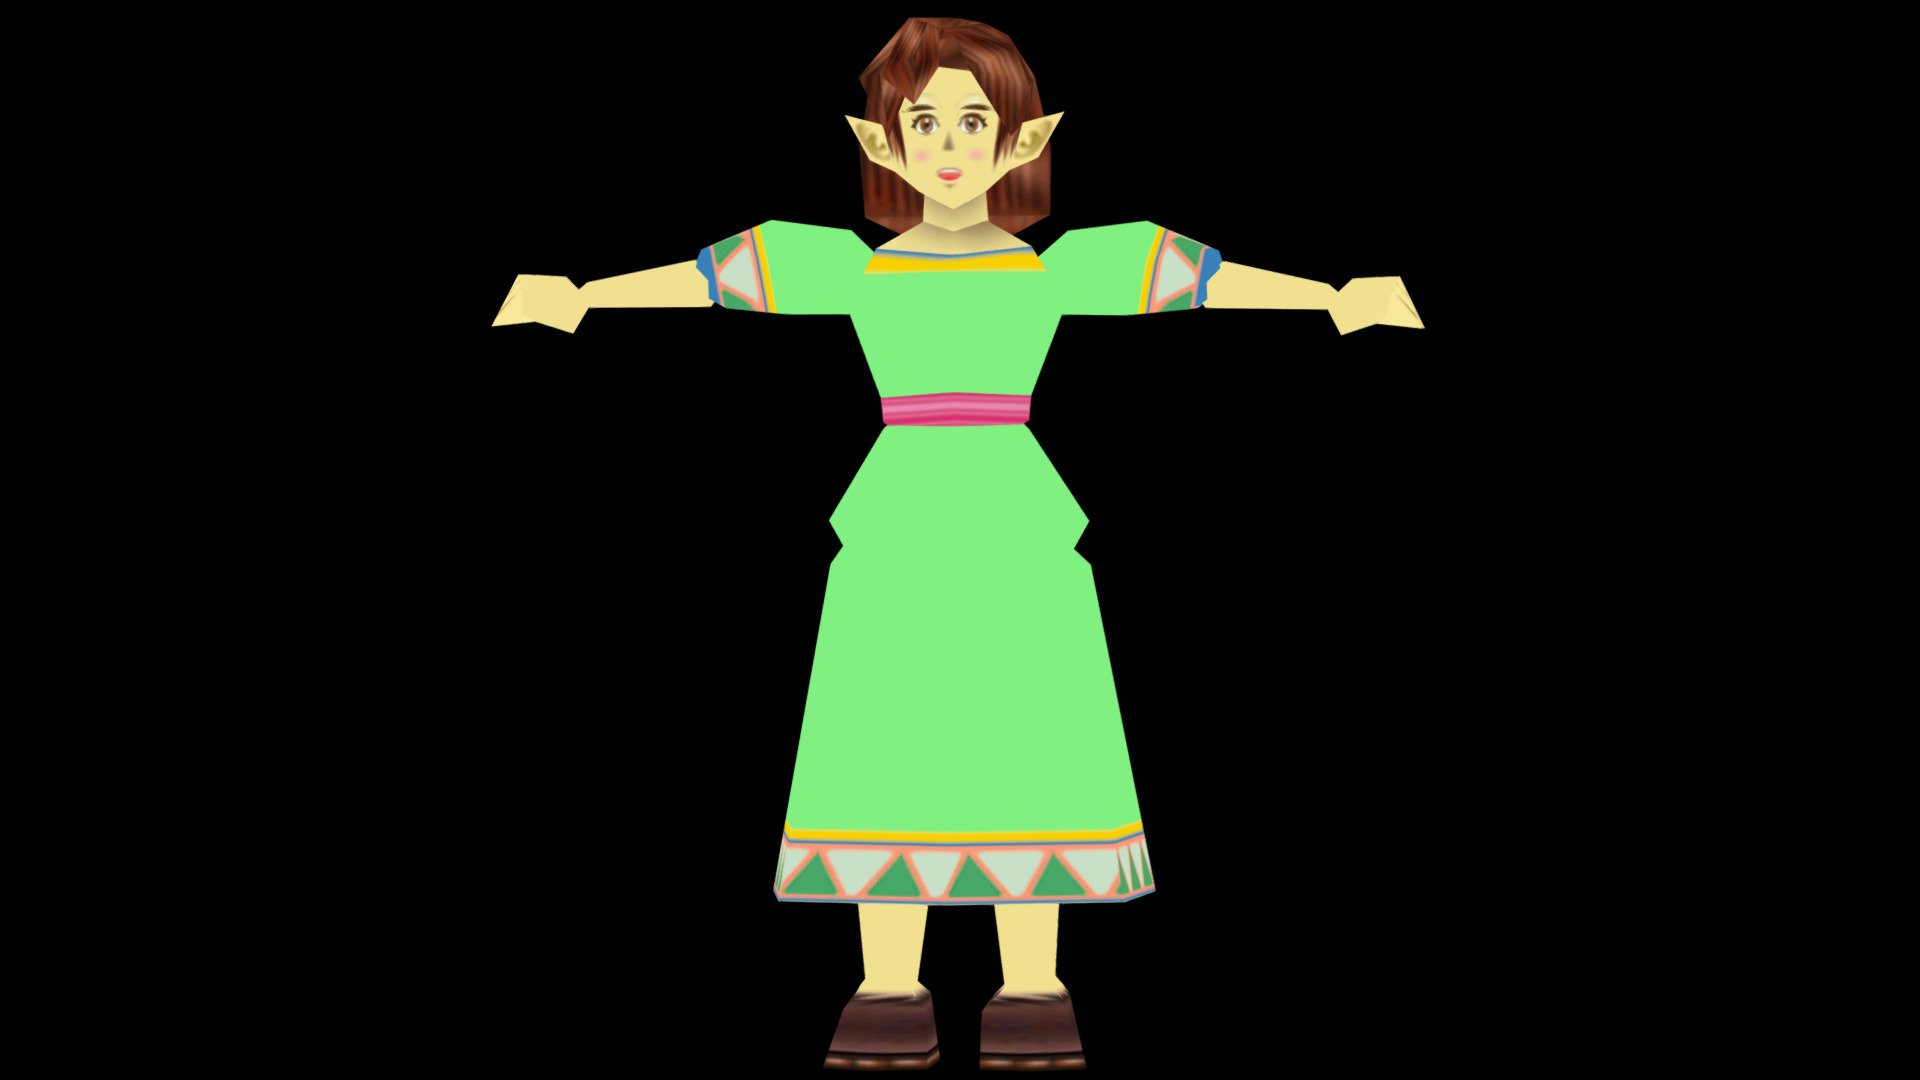 Beta Character Designs of Ocarina of Time